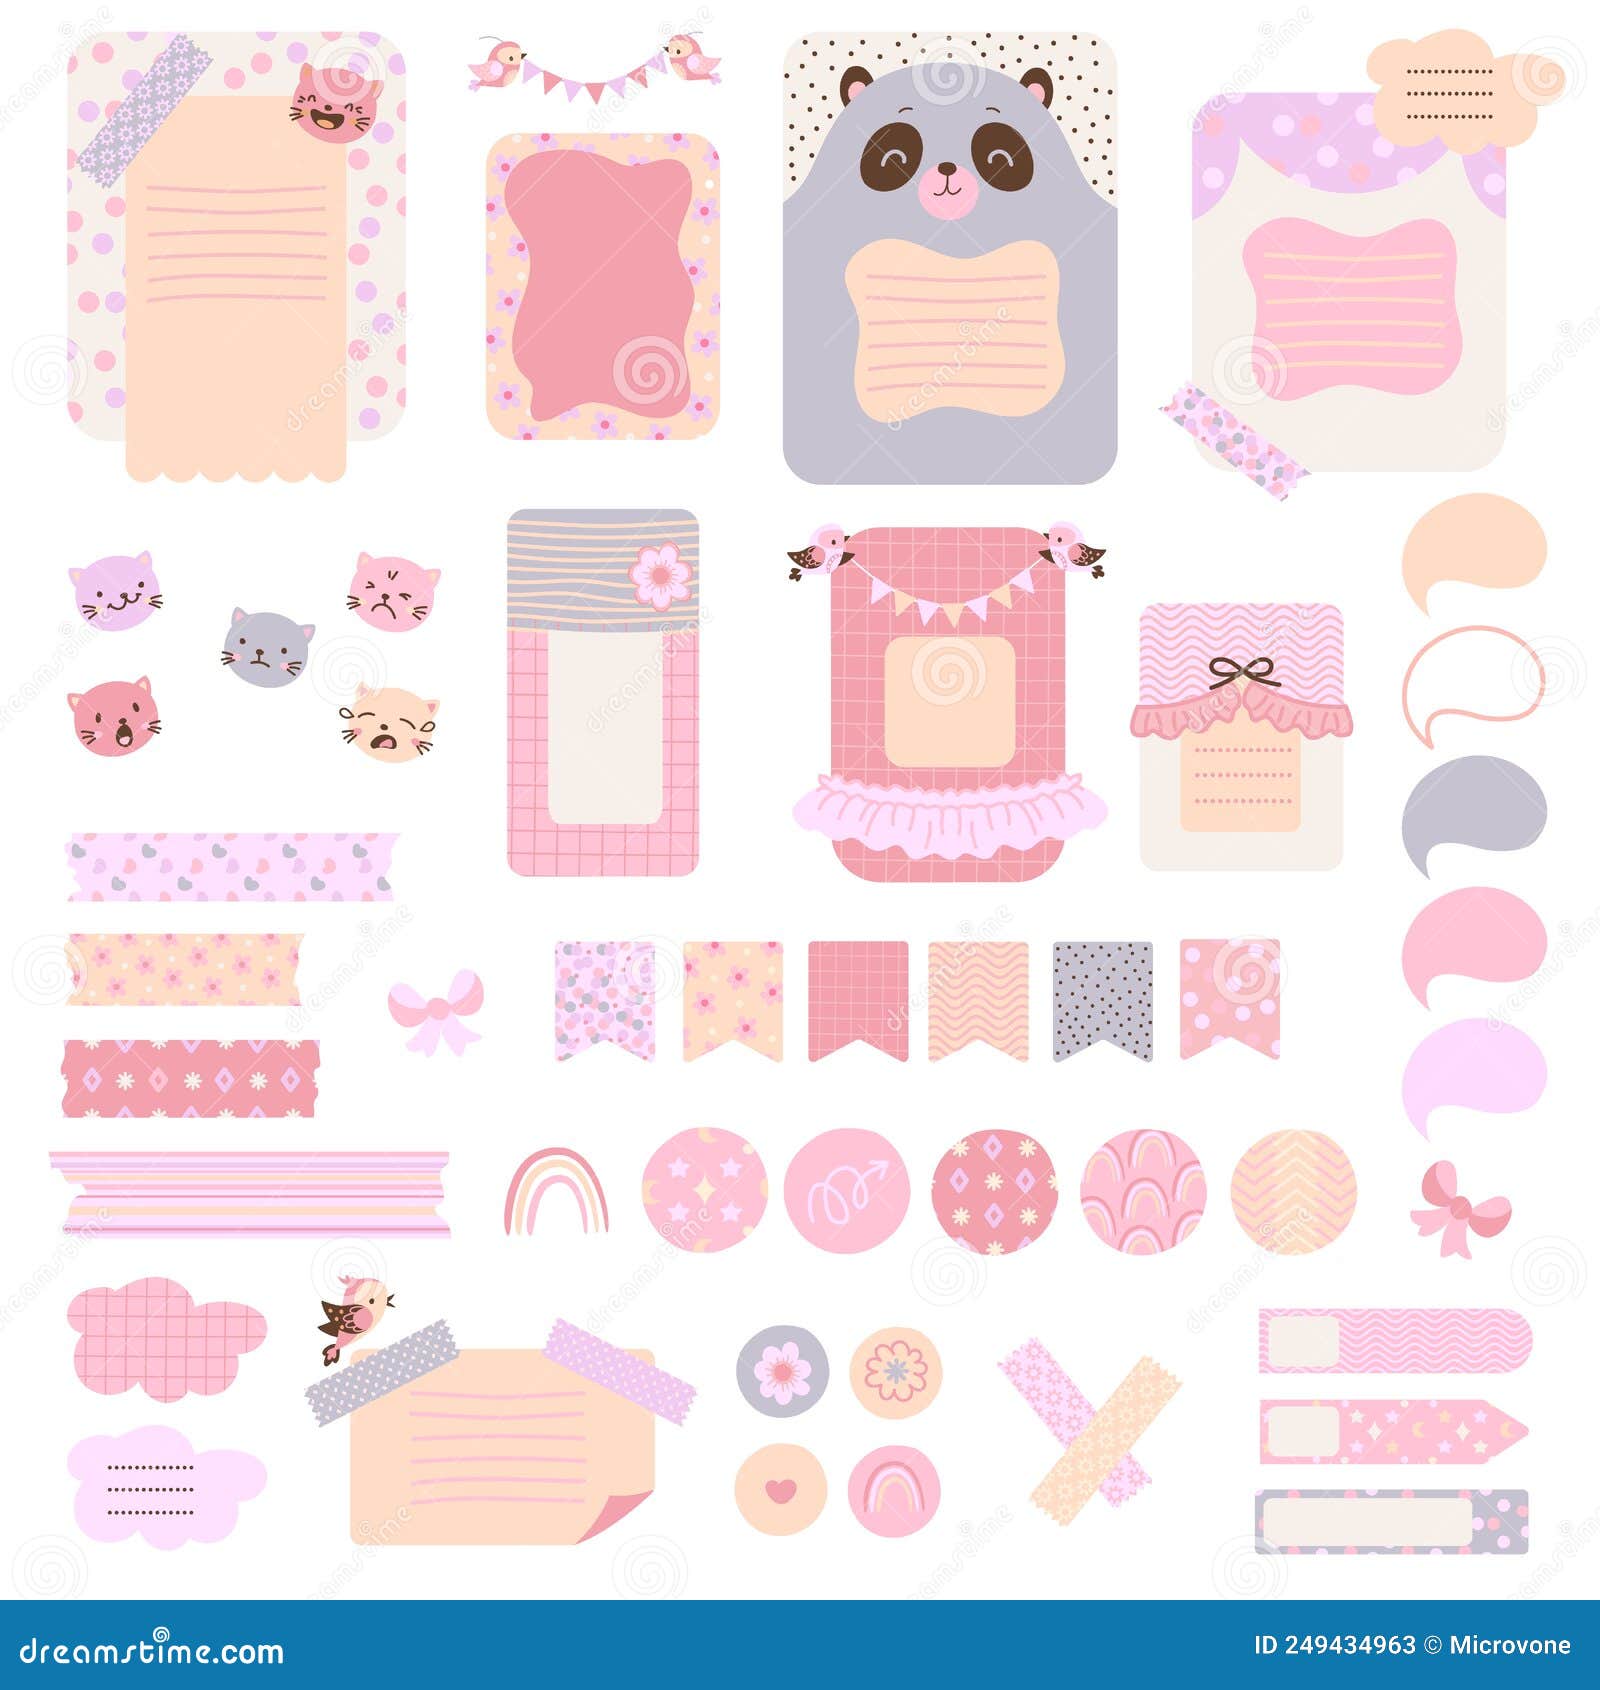 Scrapbook Cute Elements. Beauty Sticker Notes, Kids Planning or Journal  Note Stickers Stock Vector - Illustration of plan, note: 249434963